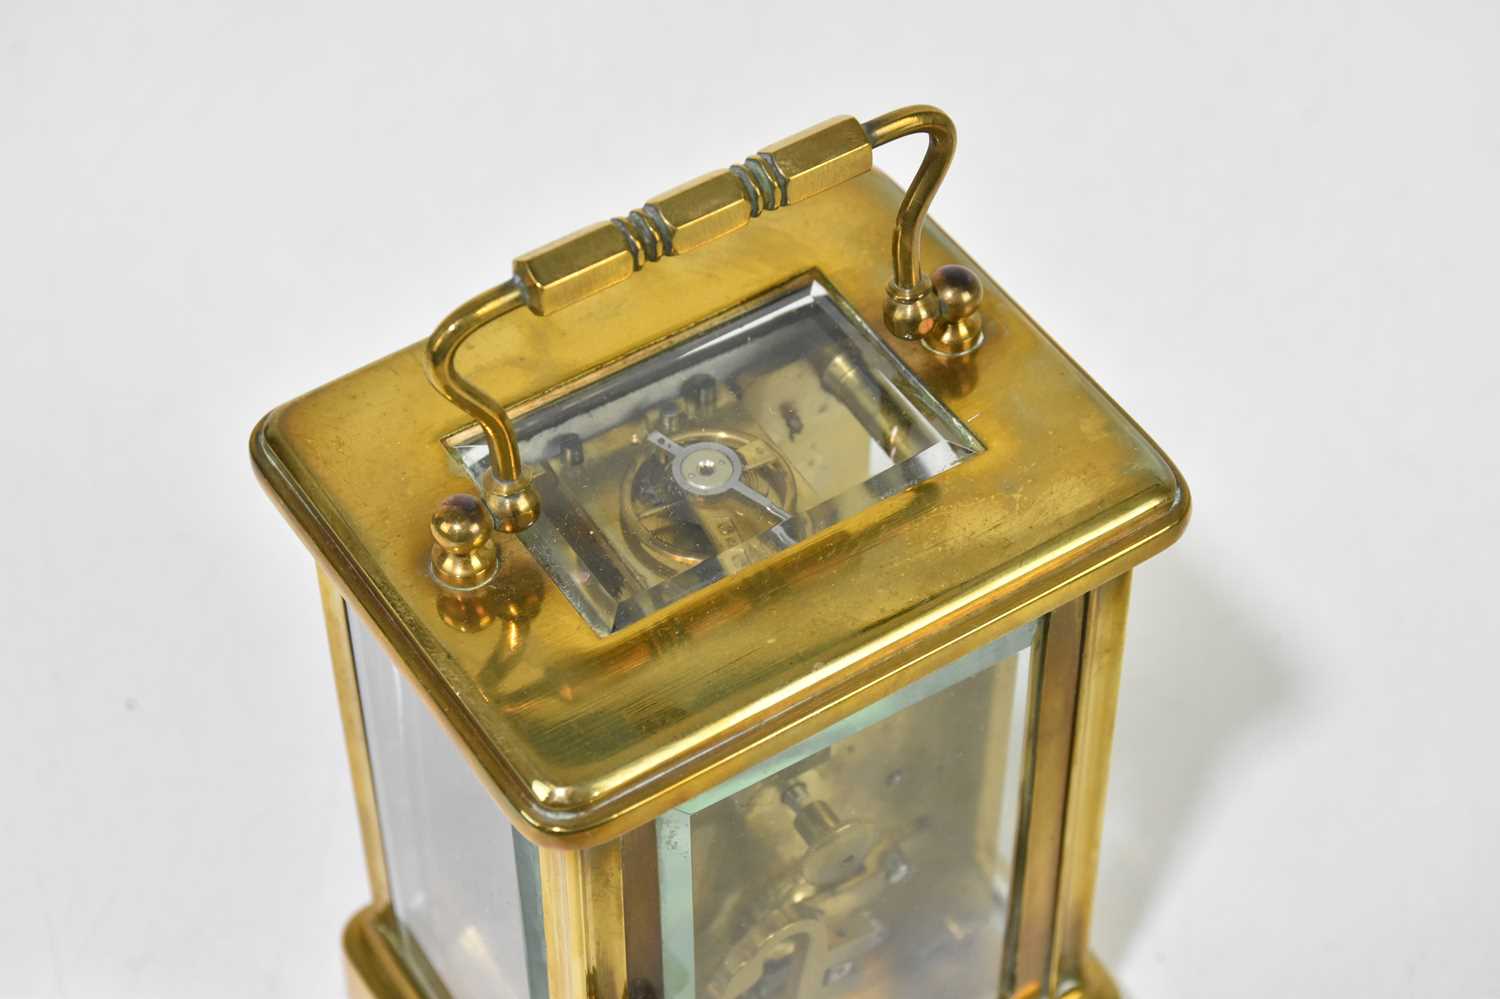 A late 19th century French lacquered brass carriage time piece, with enamelled Roman numeral dial - Image 6 of 6